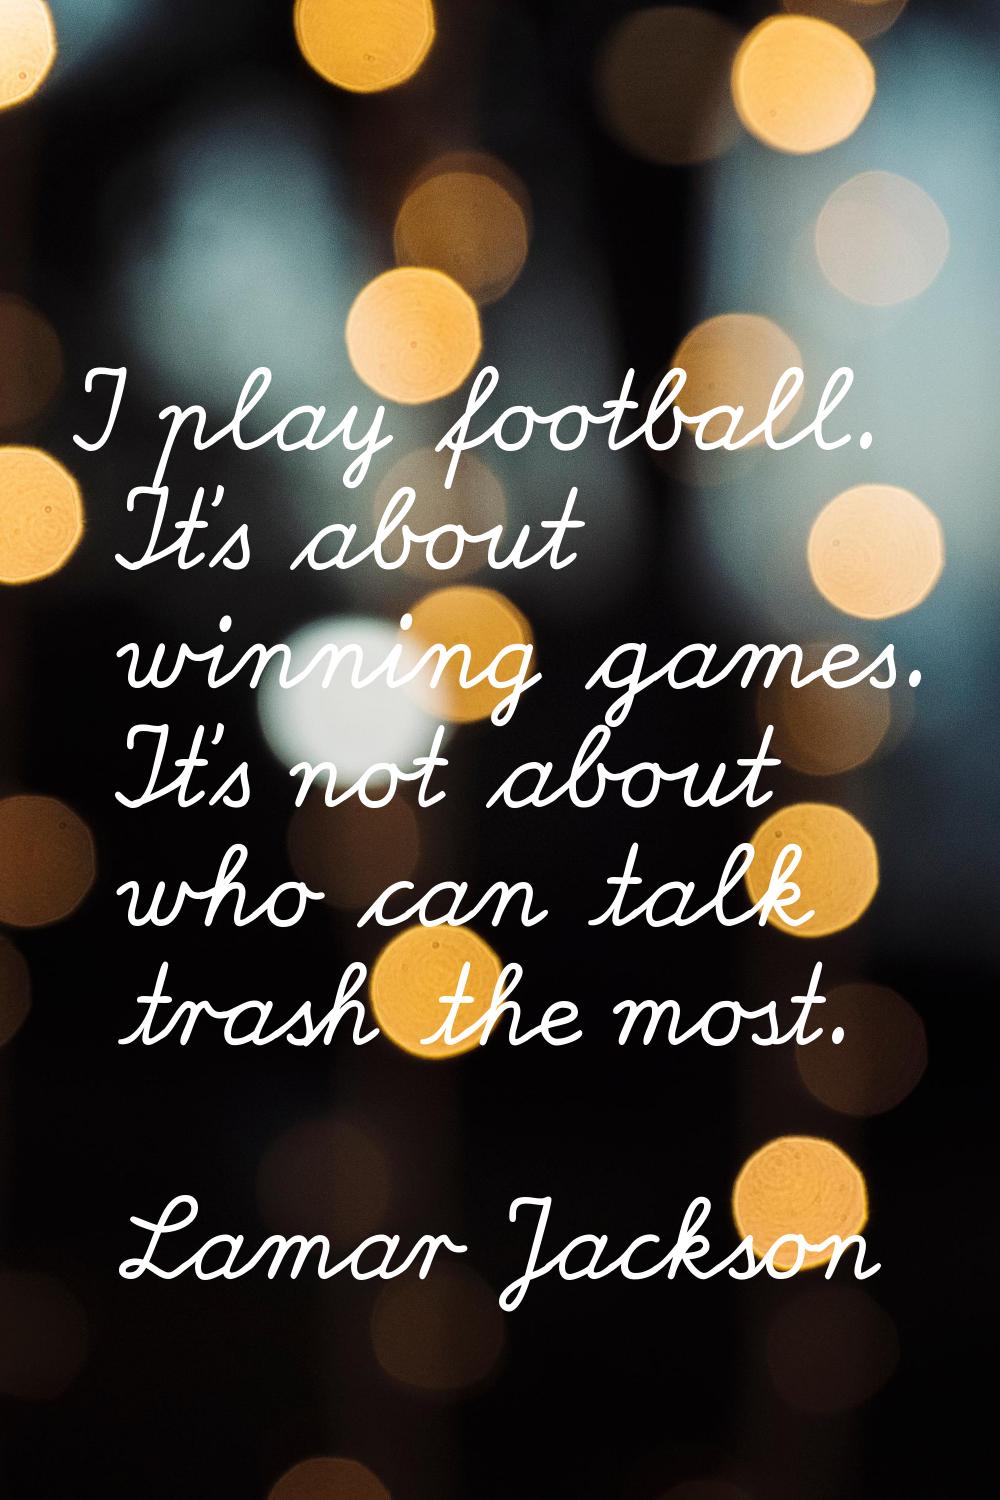 I play football. It's about winning games. It's not about who can talk trash the most.